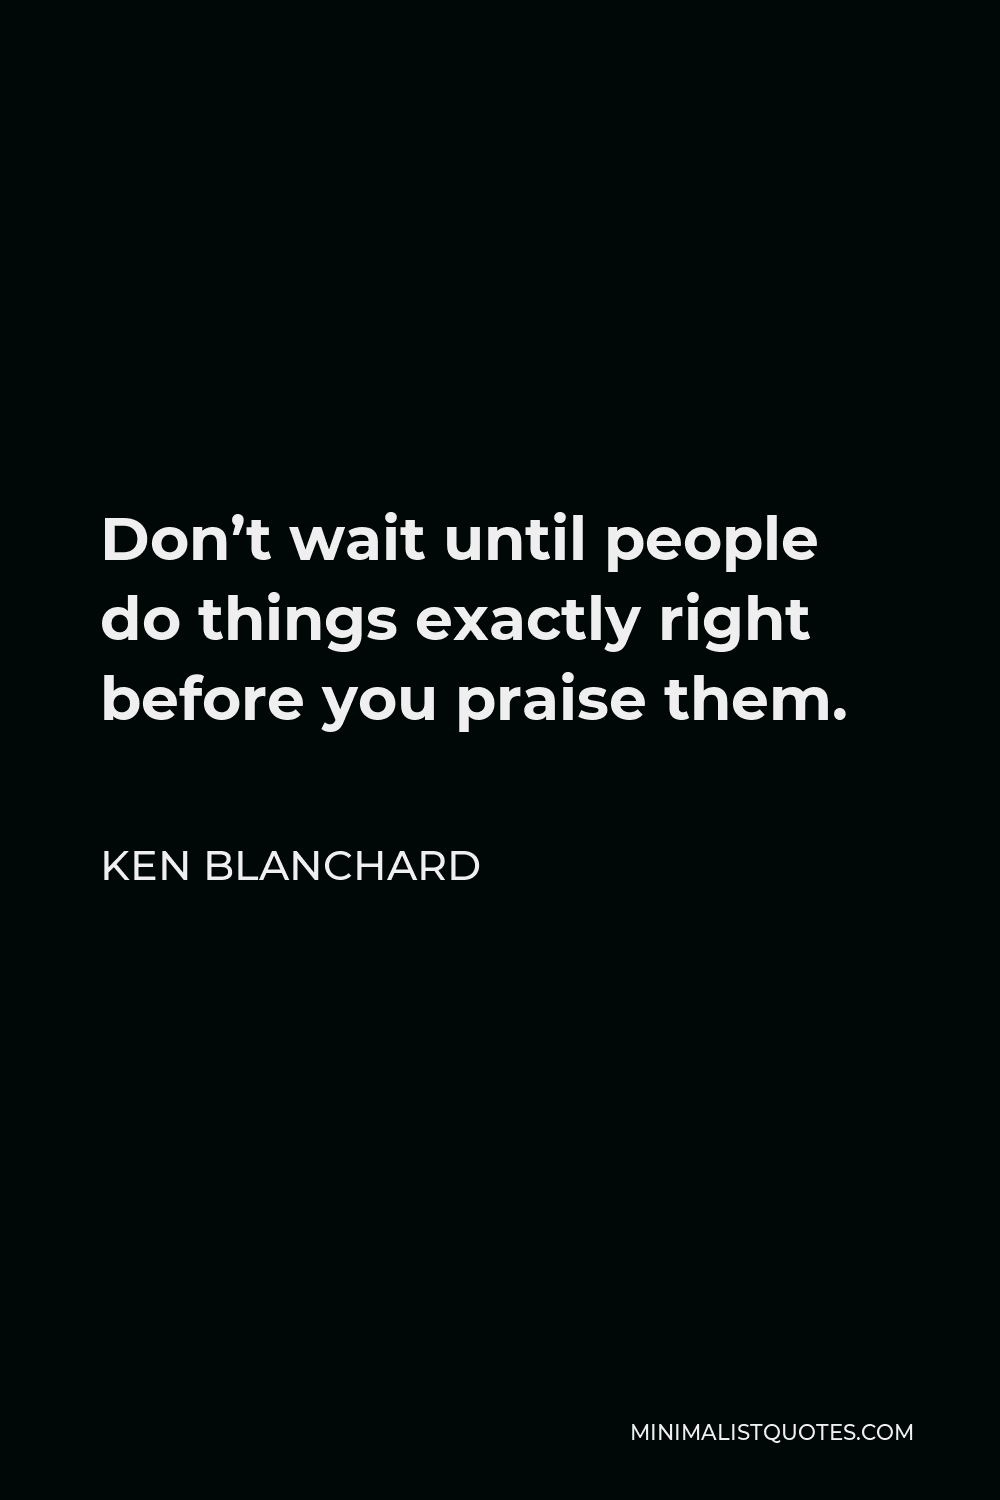 Ken Blanchard Quote - Don’t wait until people do things exactly right before you praise them.